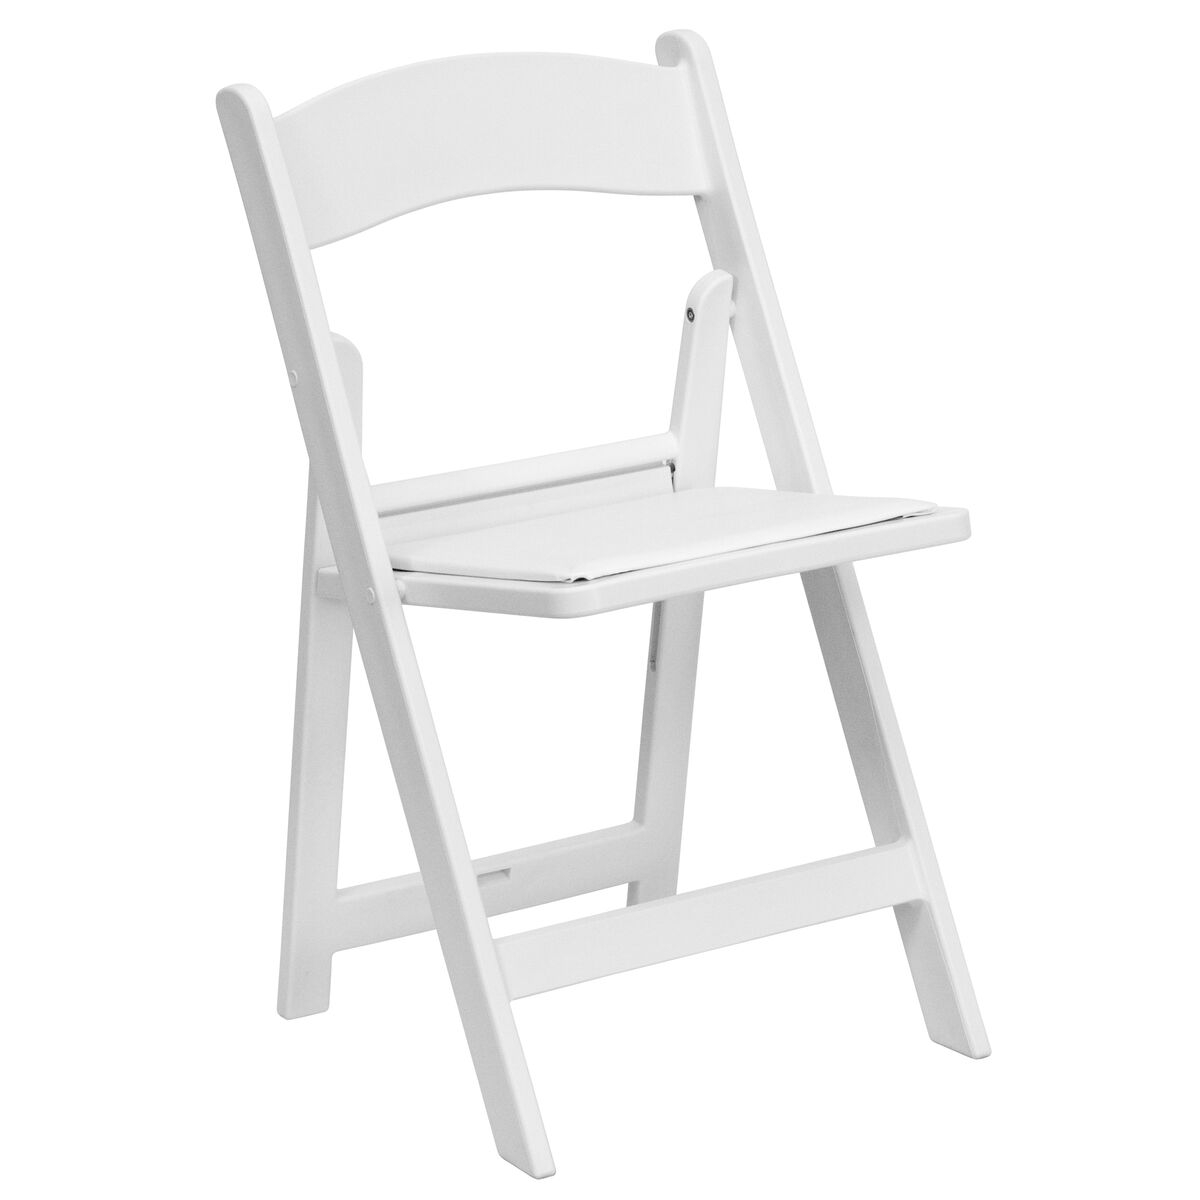 Indoor/Outdoor Lightweight Wood Folding Chair with Vinyl Padded Seat